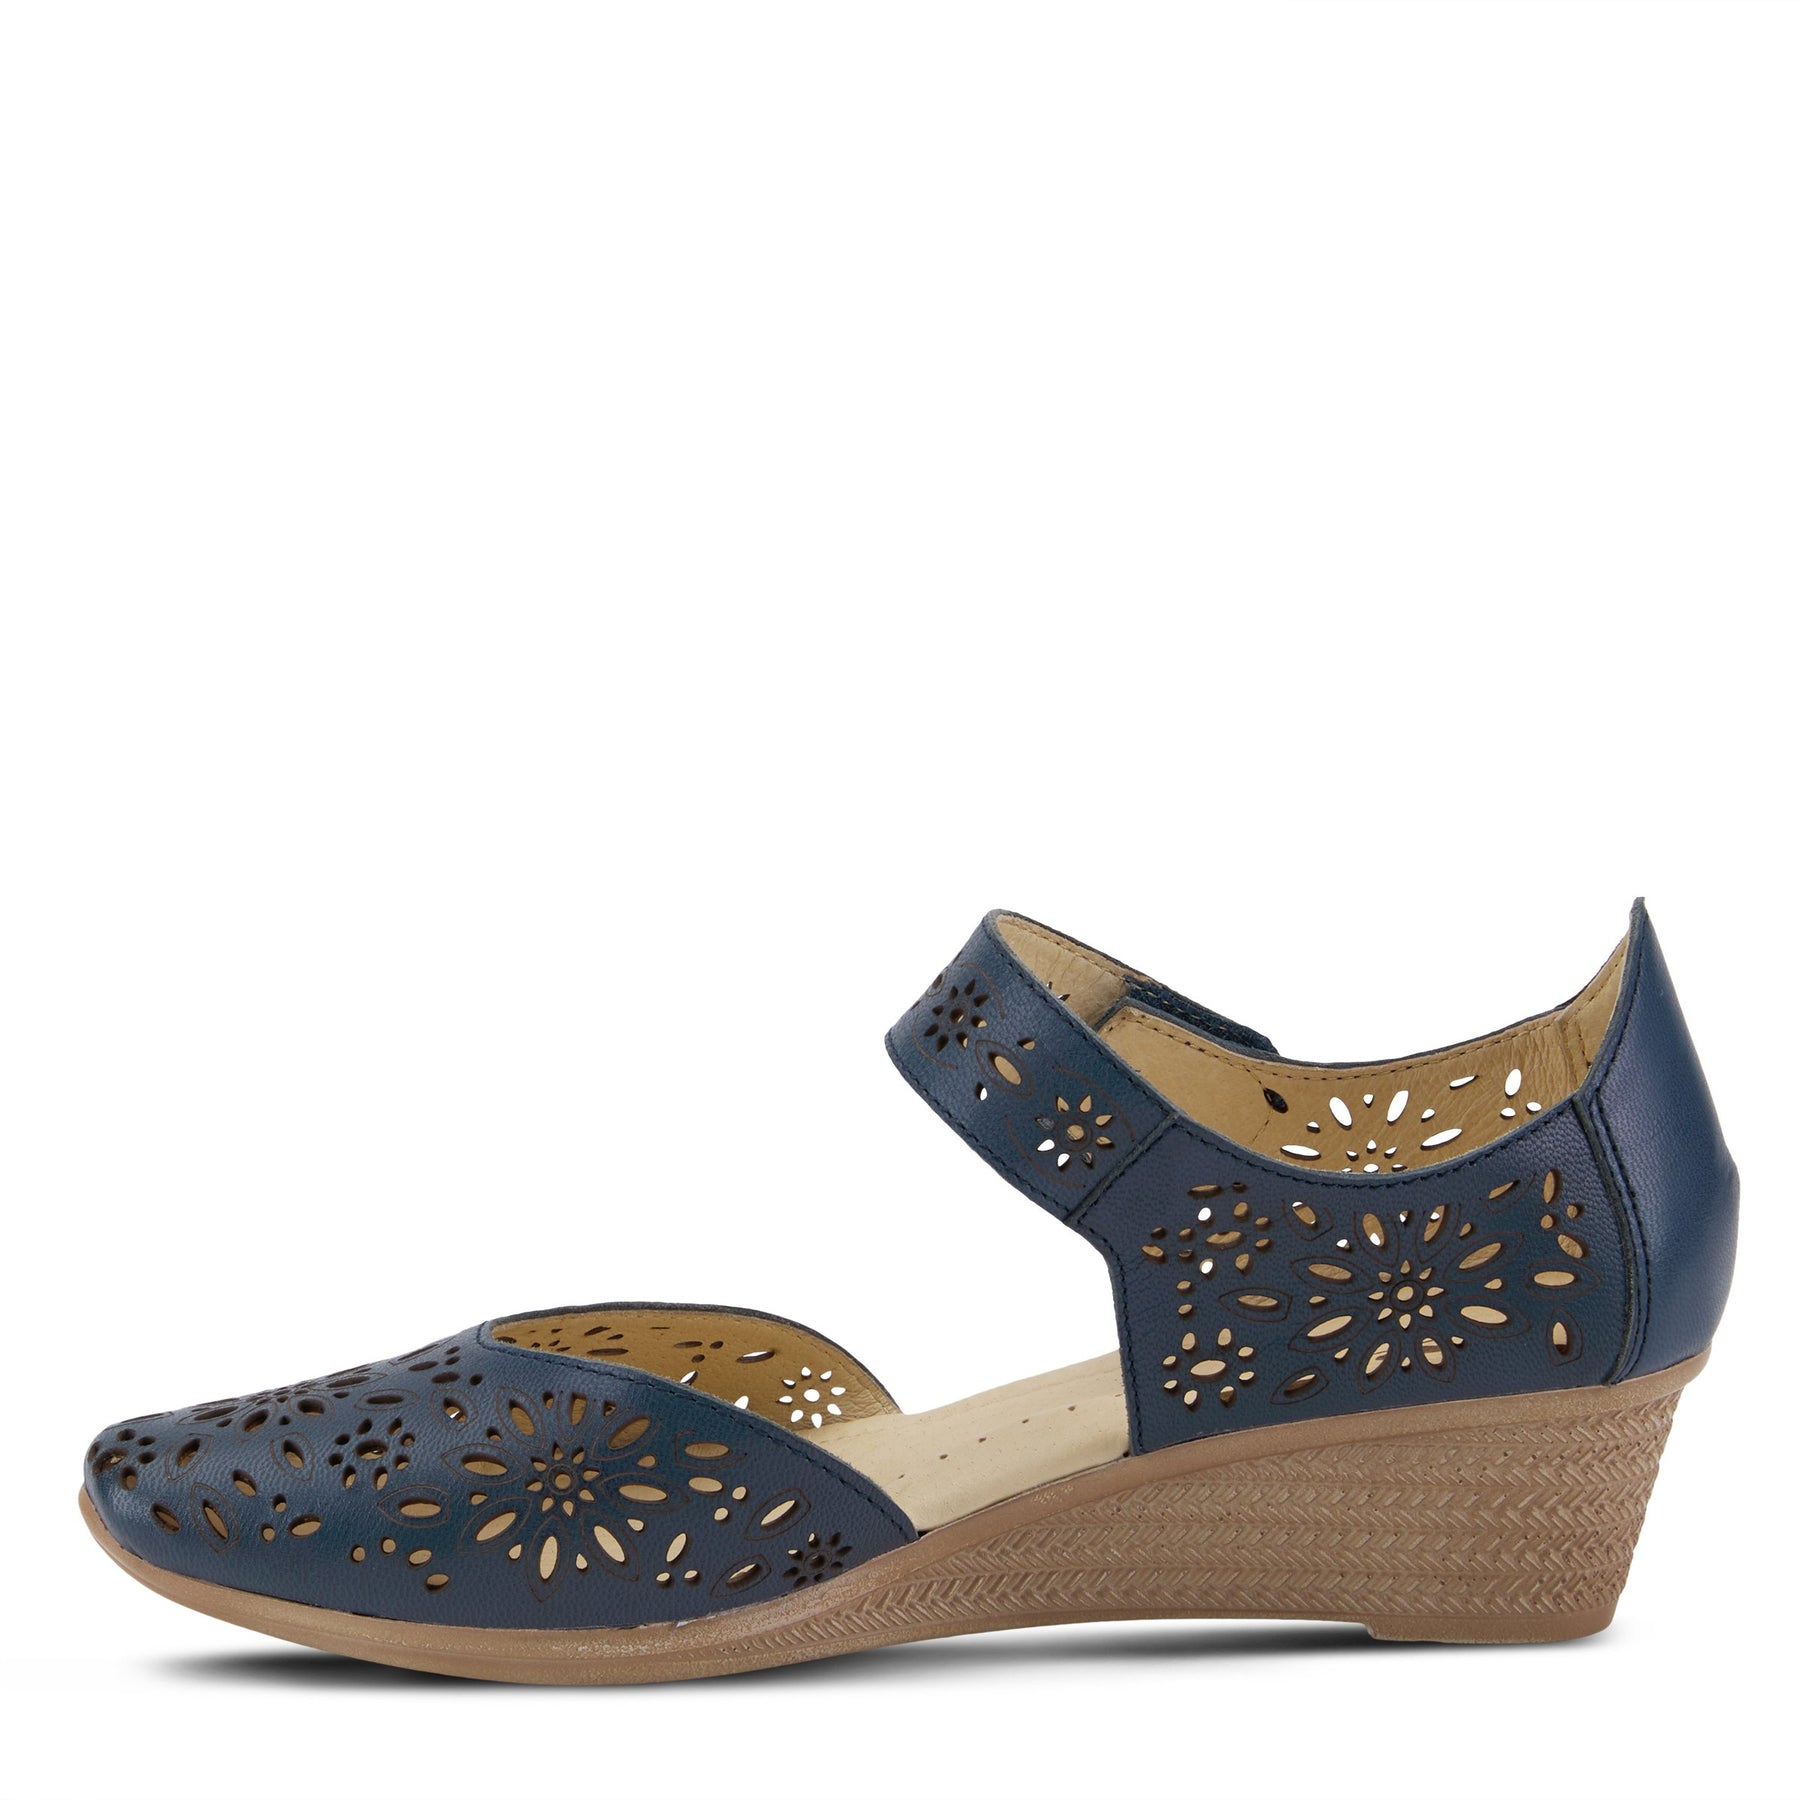 NOUGAT MARY JANE SHOE by SPRING STEP – Spring Step Shoes